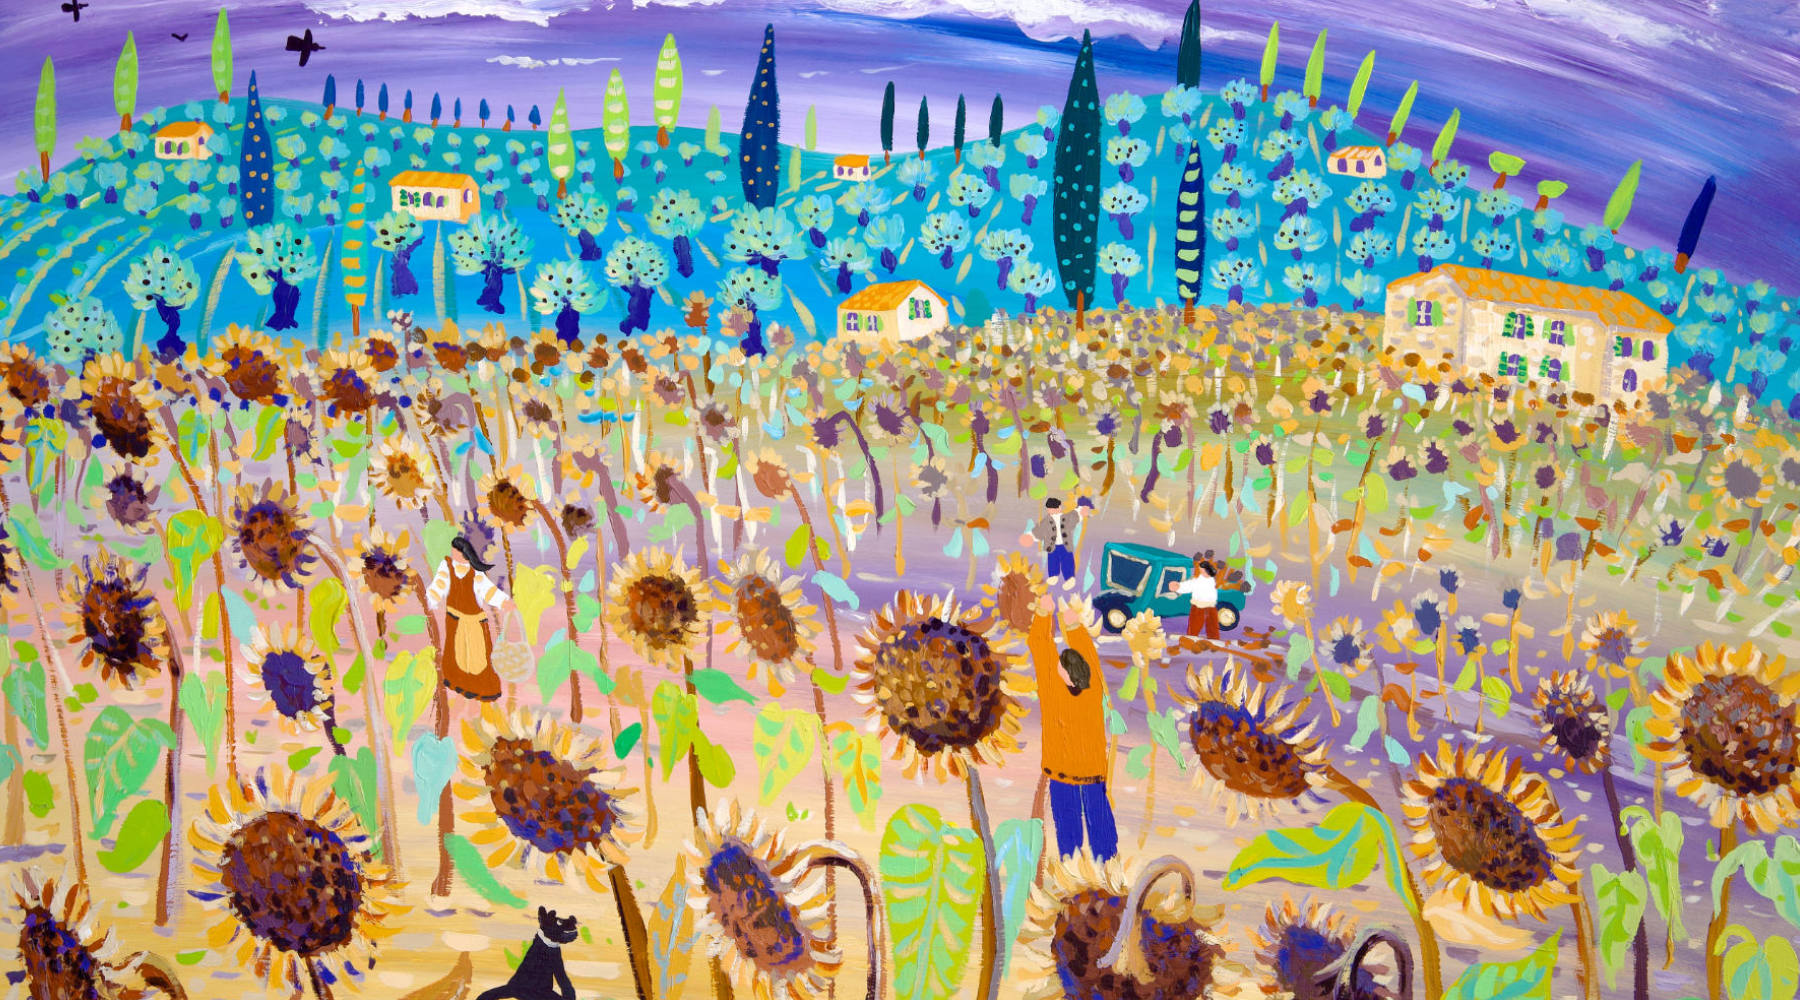 The Harvest by Amanda Harris. Inspired by John Dyer's painting 'Sun Dried Faces, Italy'